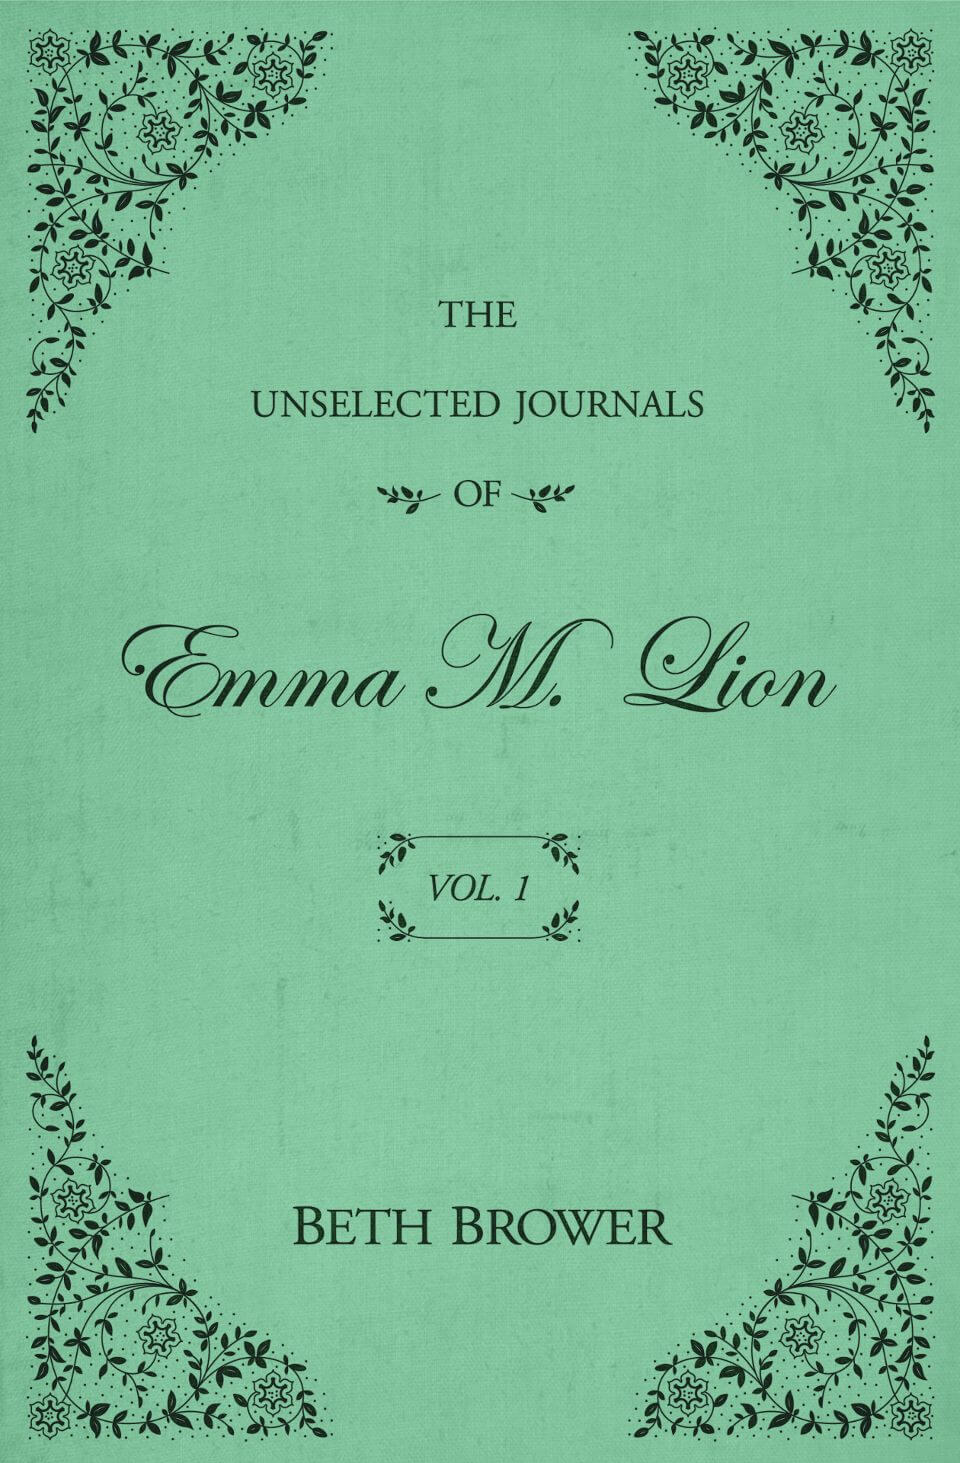 The unselected journals of Emma m. lion book cover